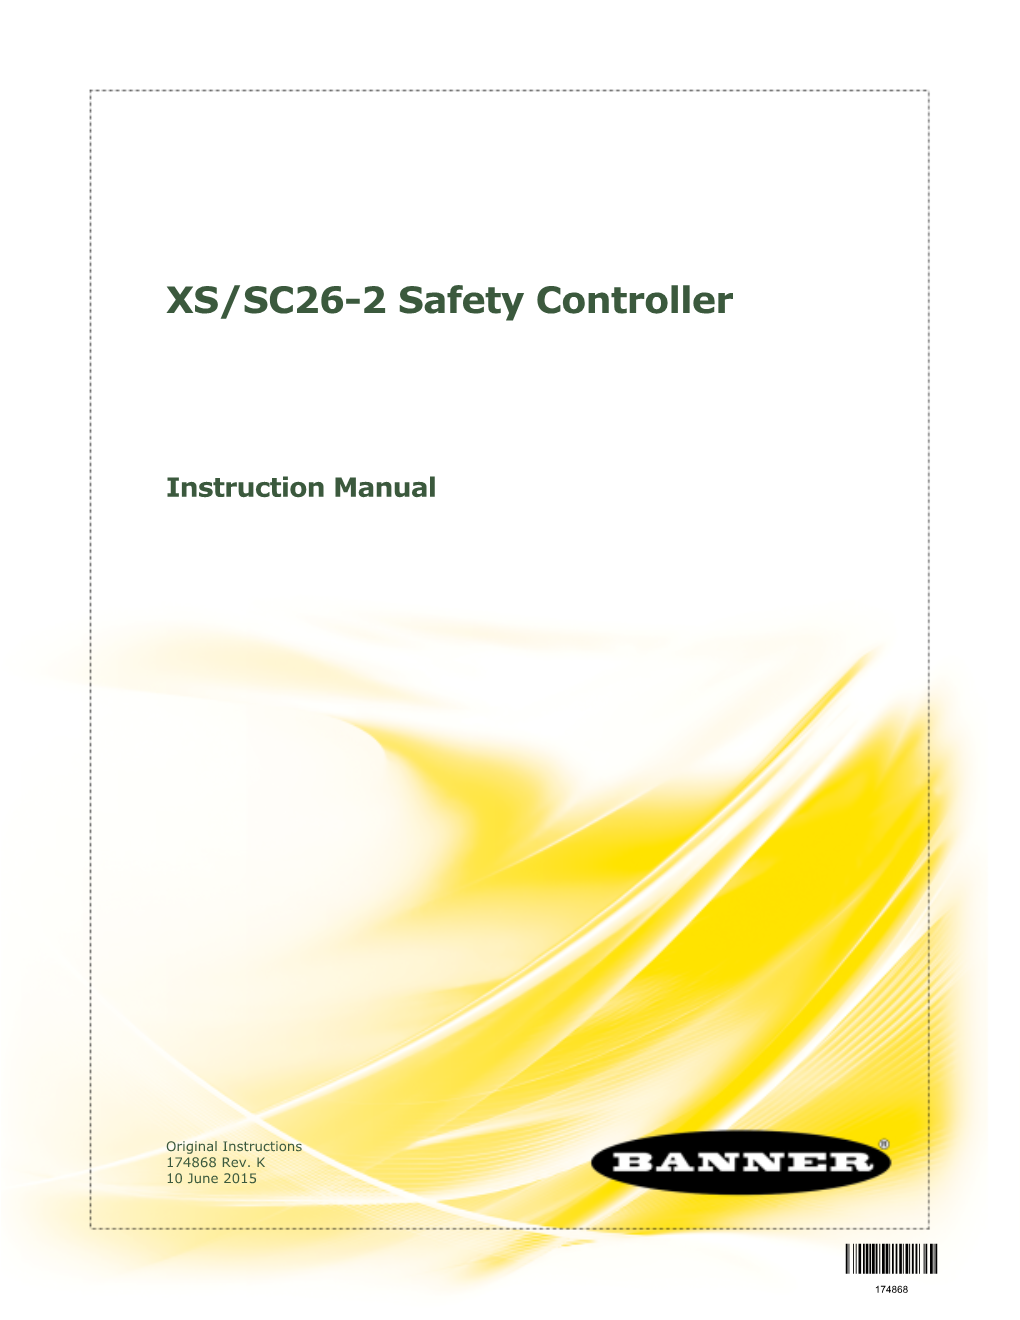 XS/SC26-2 Safety Controller